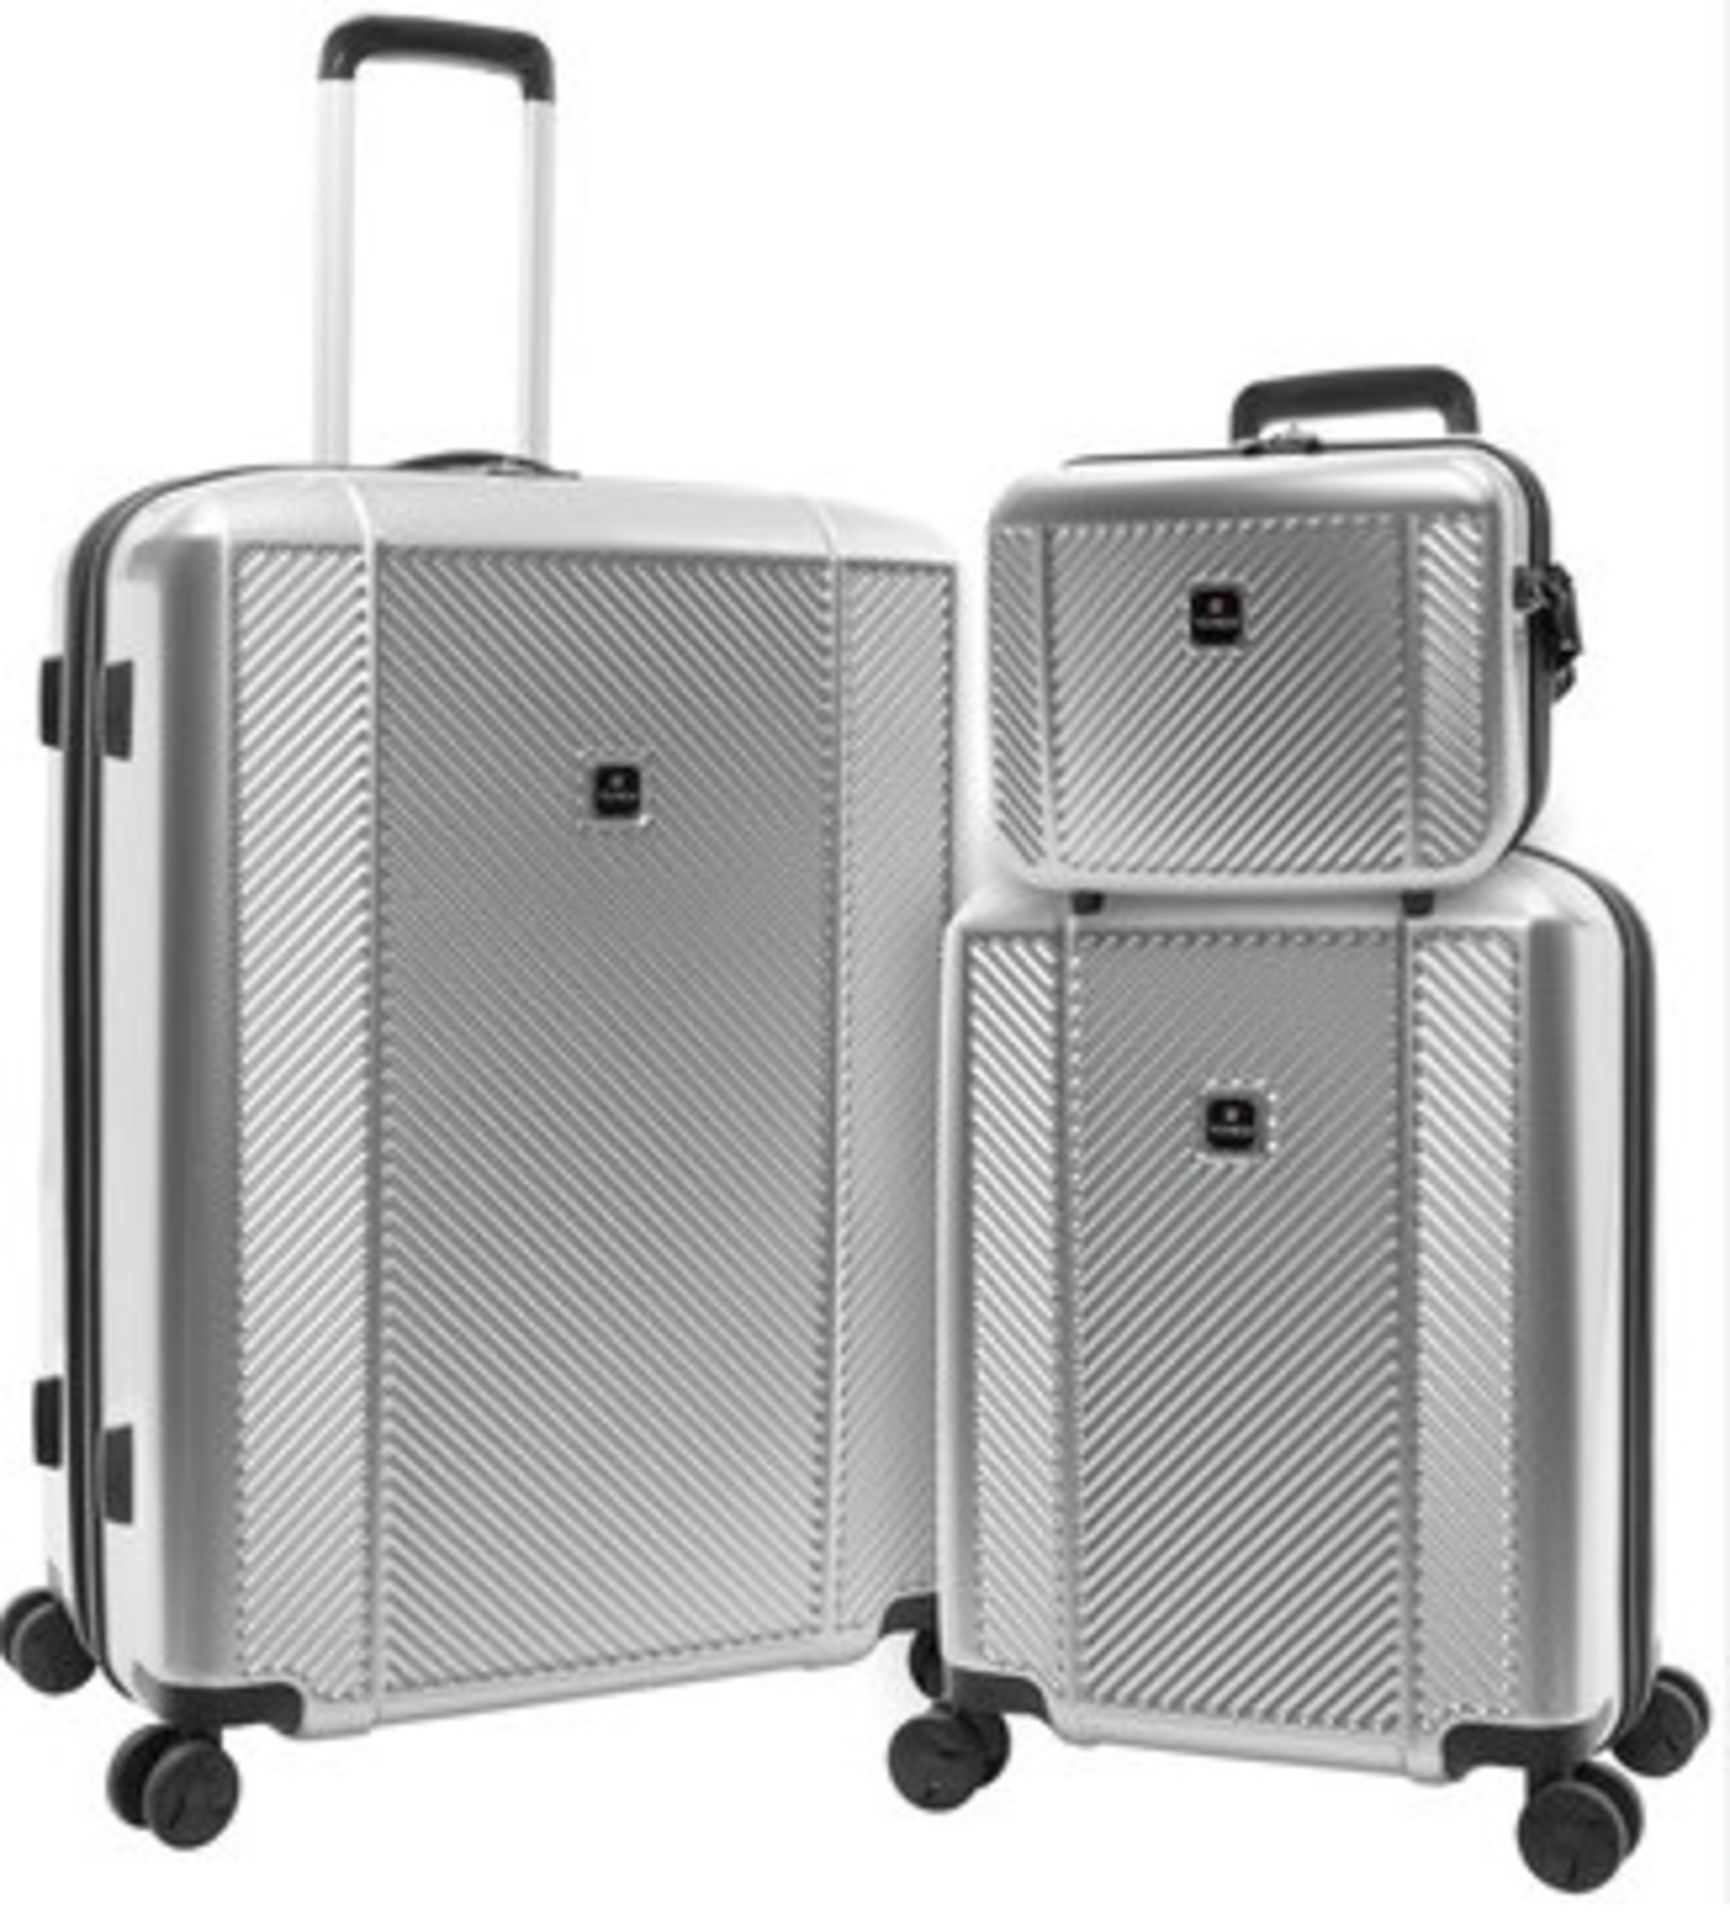 Pallet To Contain 16 x New Boxed 3 Piece Sets of TAG Spectrum Hardside Luggage Set. (SILVER). RRP £ - Image 4 of 4